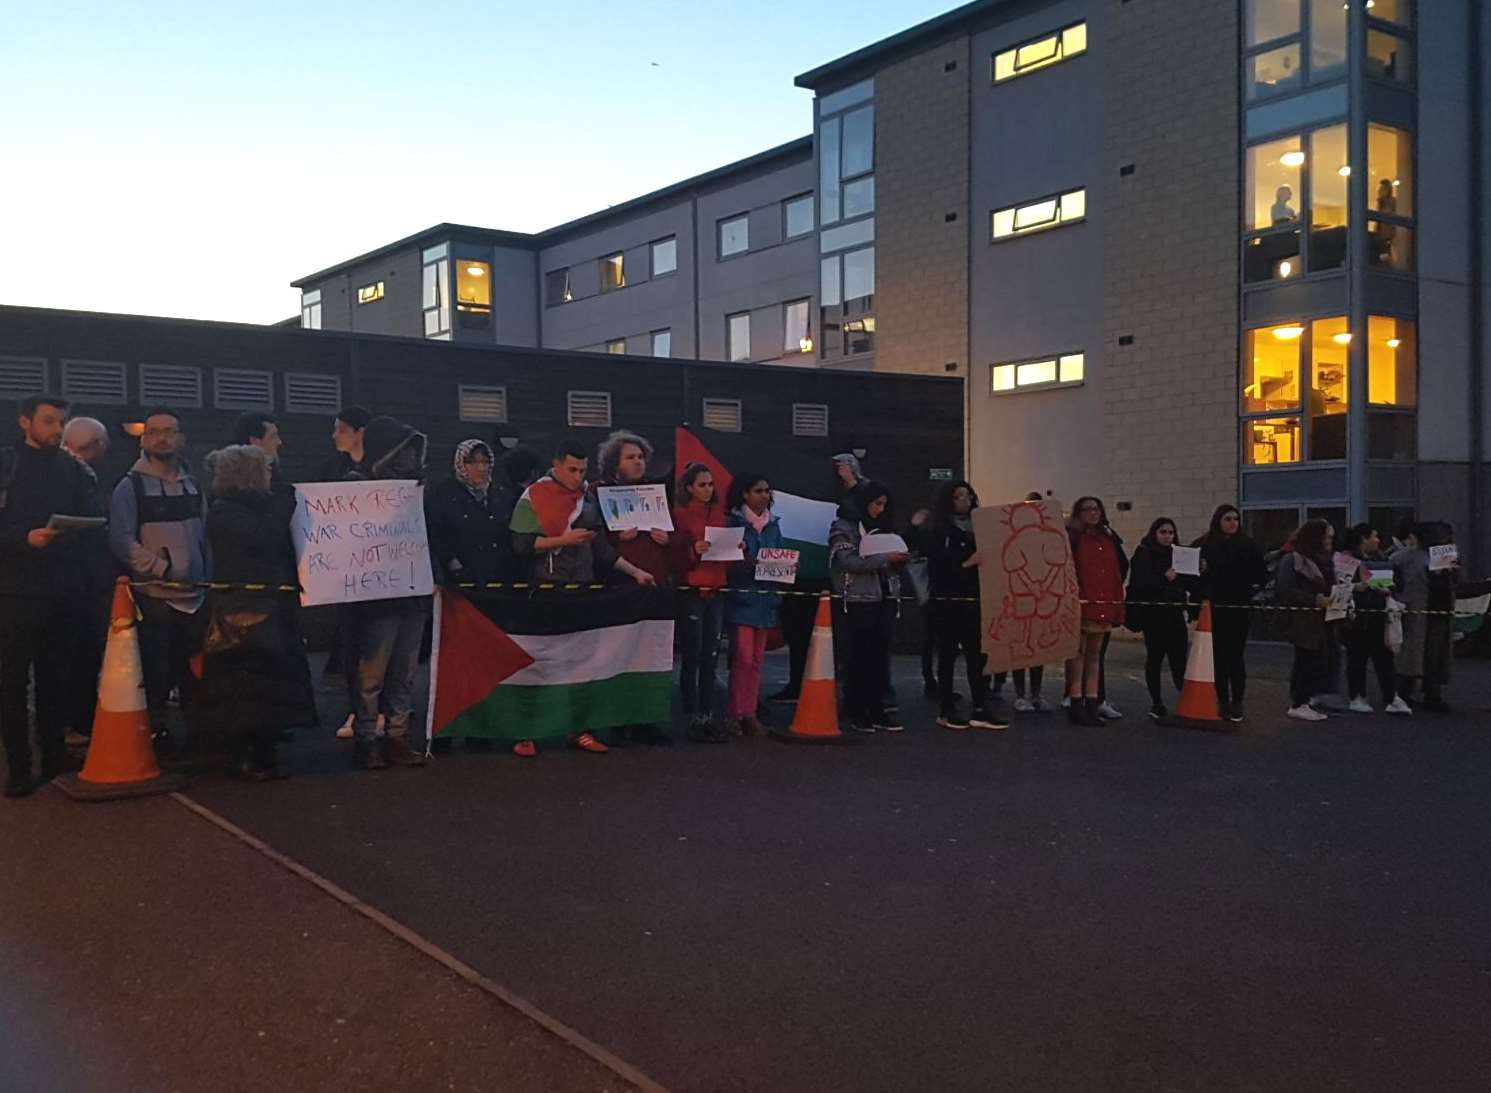 Palestine and muslim students protest at the University of Kent over visit of Israeli ambassador